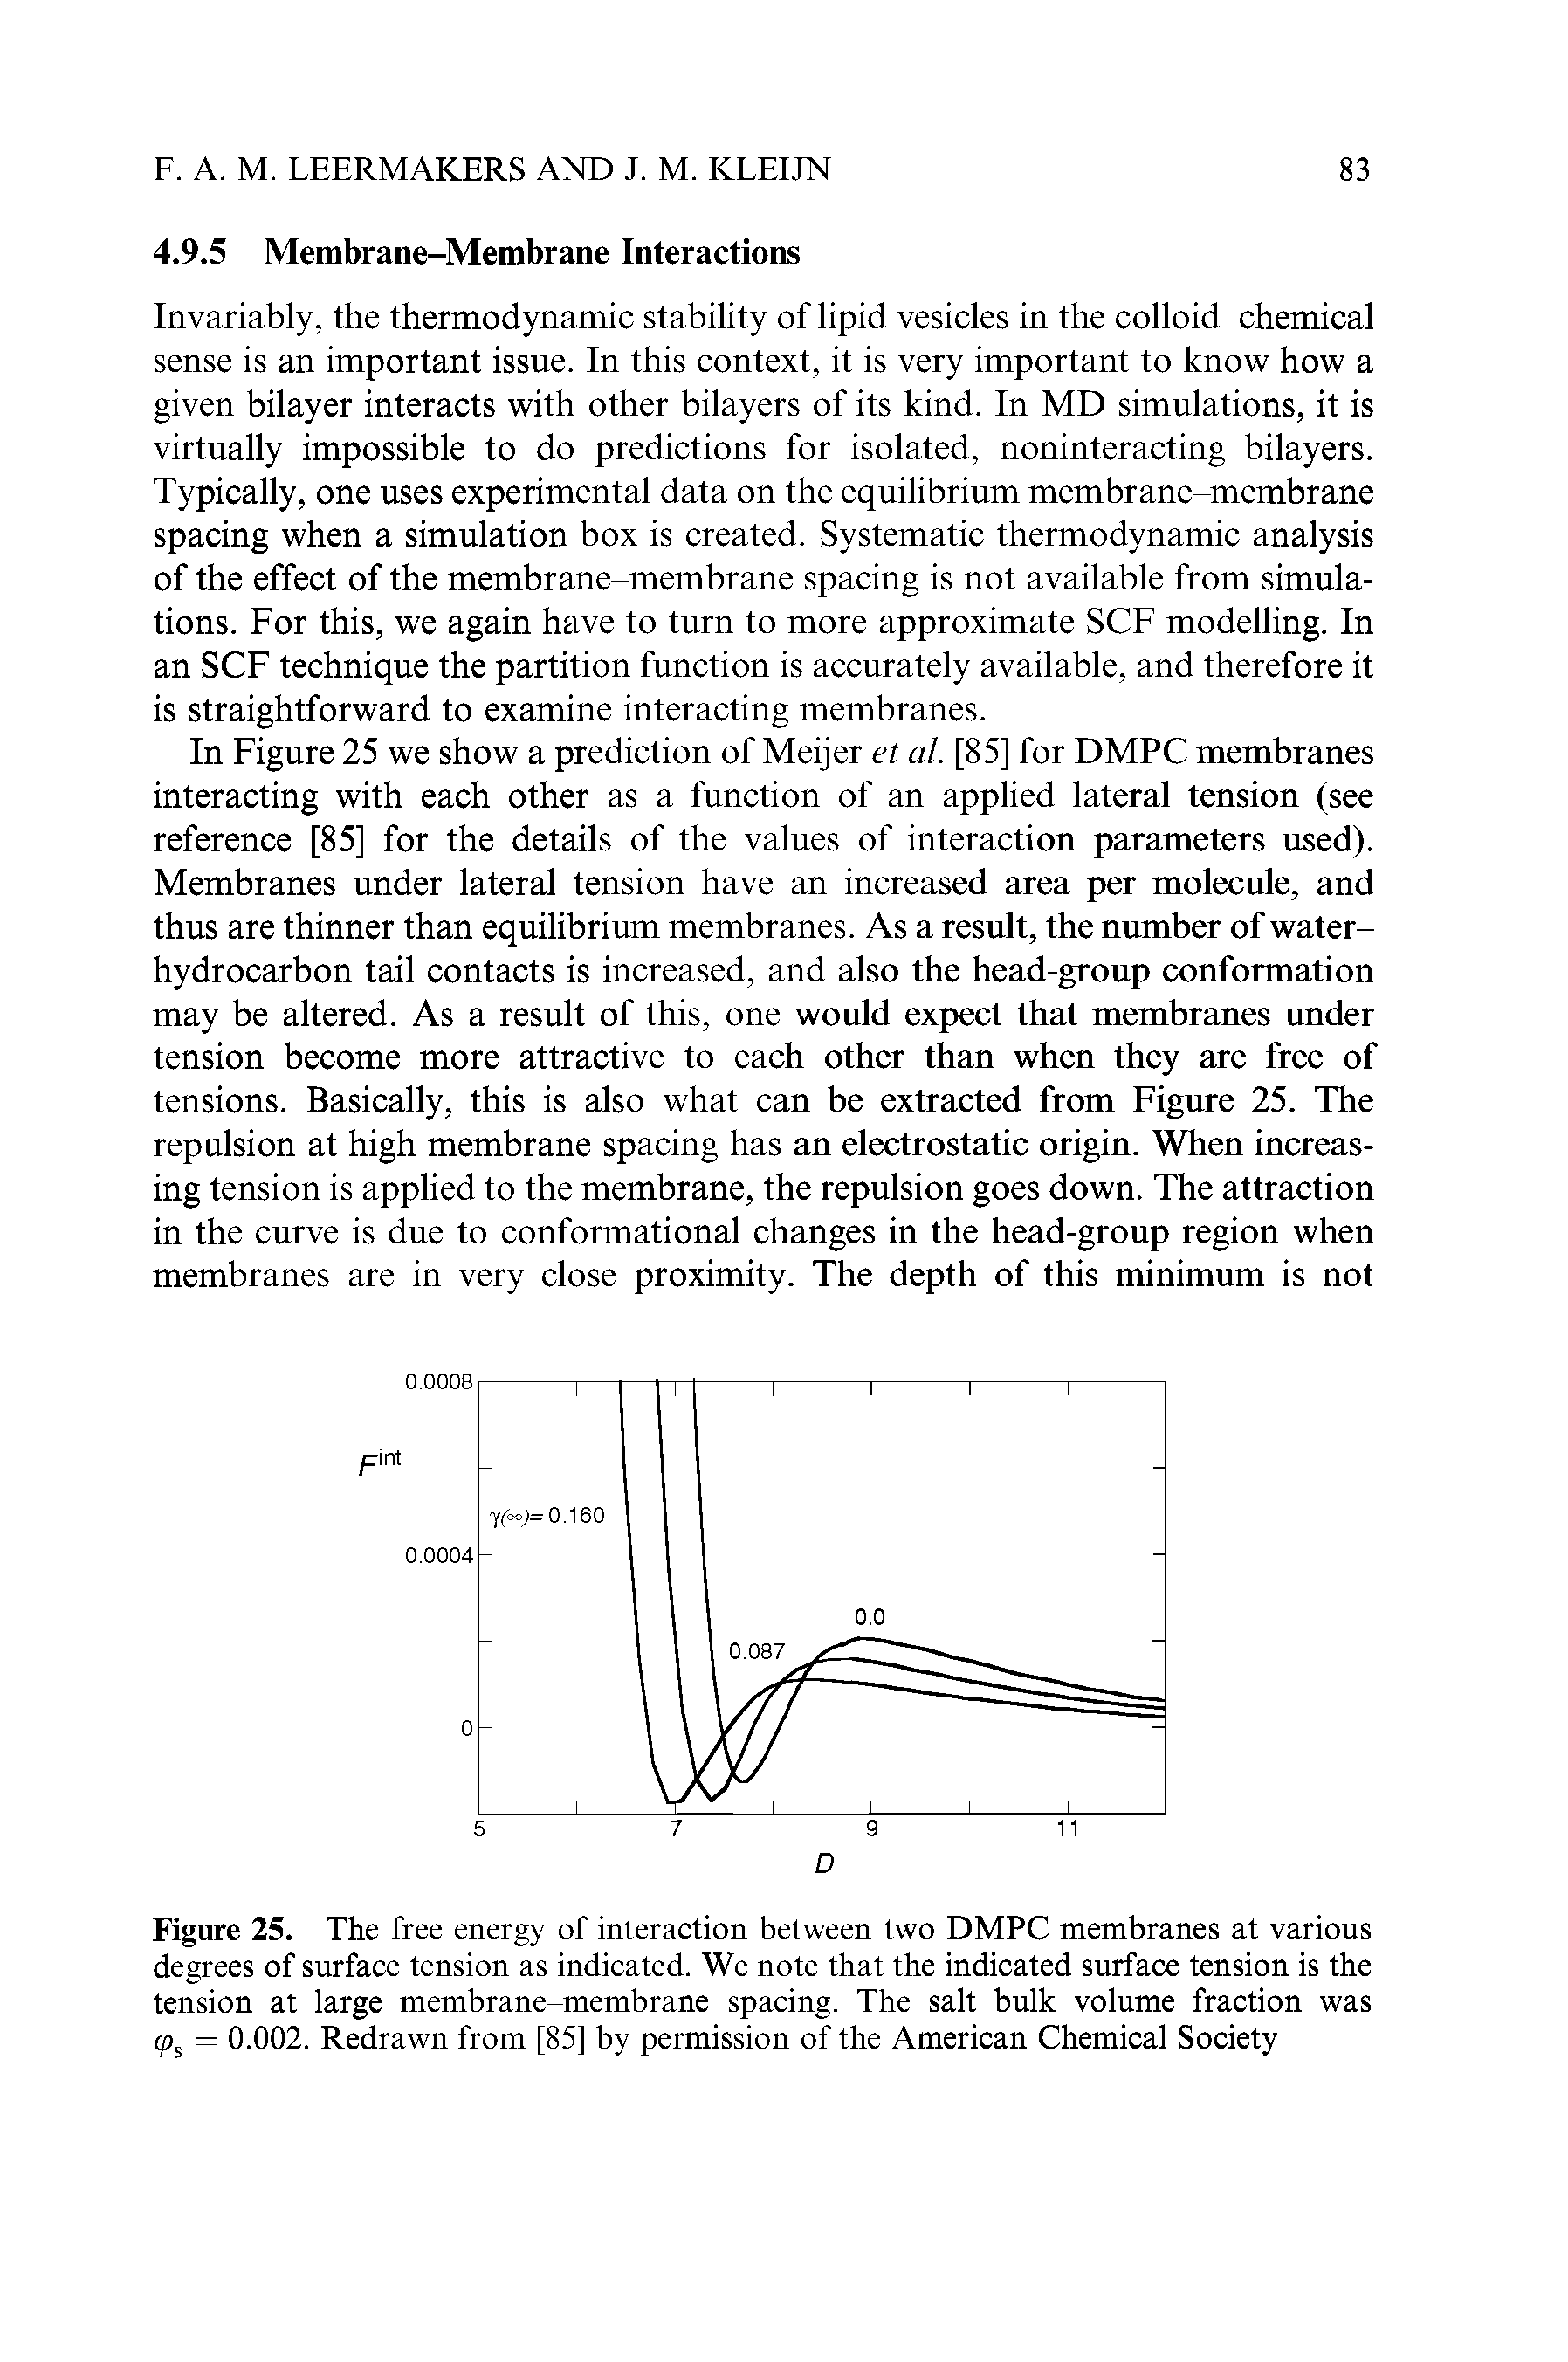 Figure 25. The free energy of interaction between two DMPC membranes at various degrees of surface tension as indicated. We note that the indicated surface tension is the tension at large membrane-membrane spacing. The salt bulk volume fraction was cps — 0.002. Redrawn from [85] by permission of the American Chemical Society...